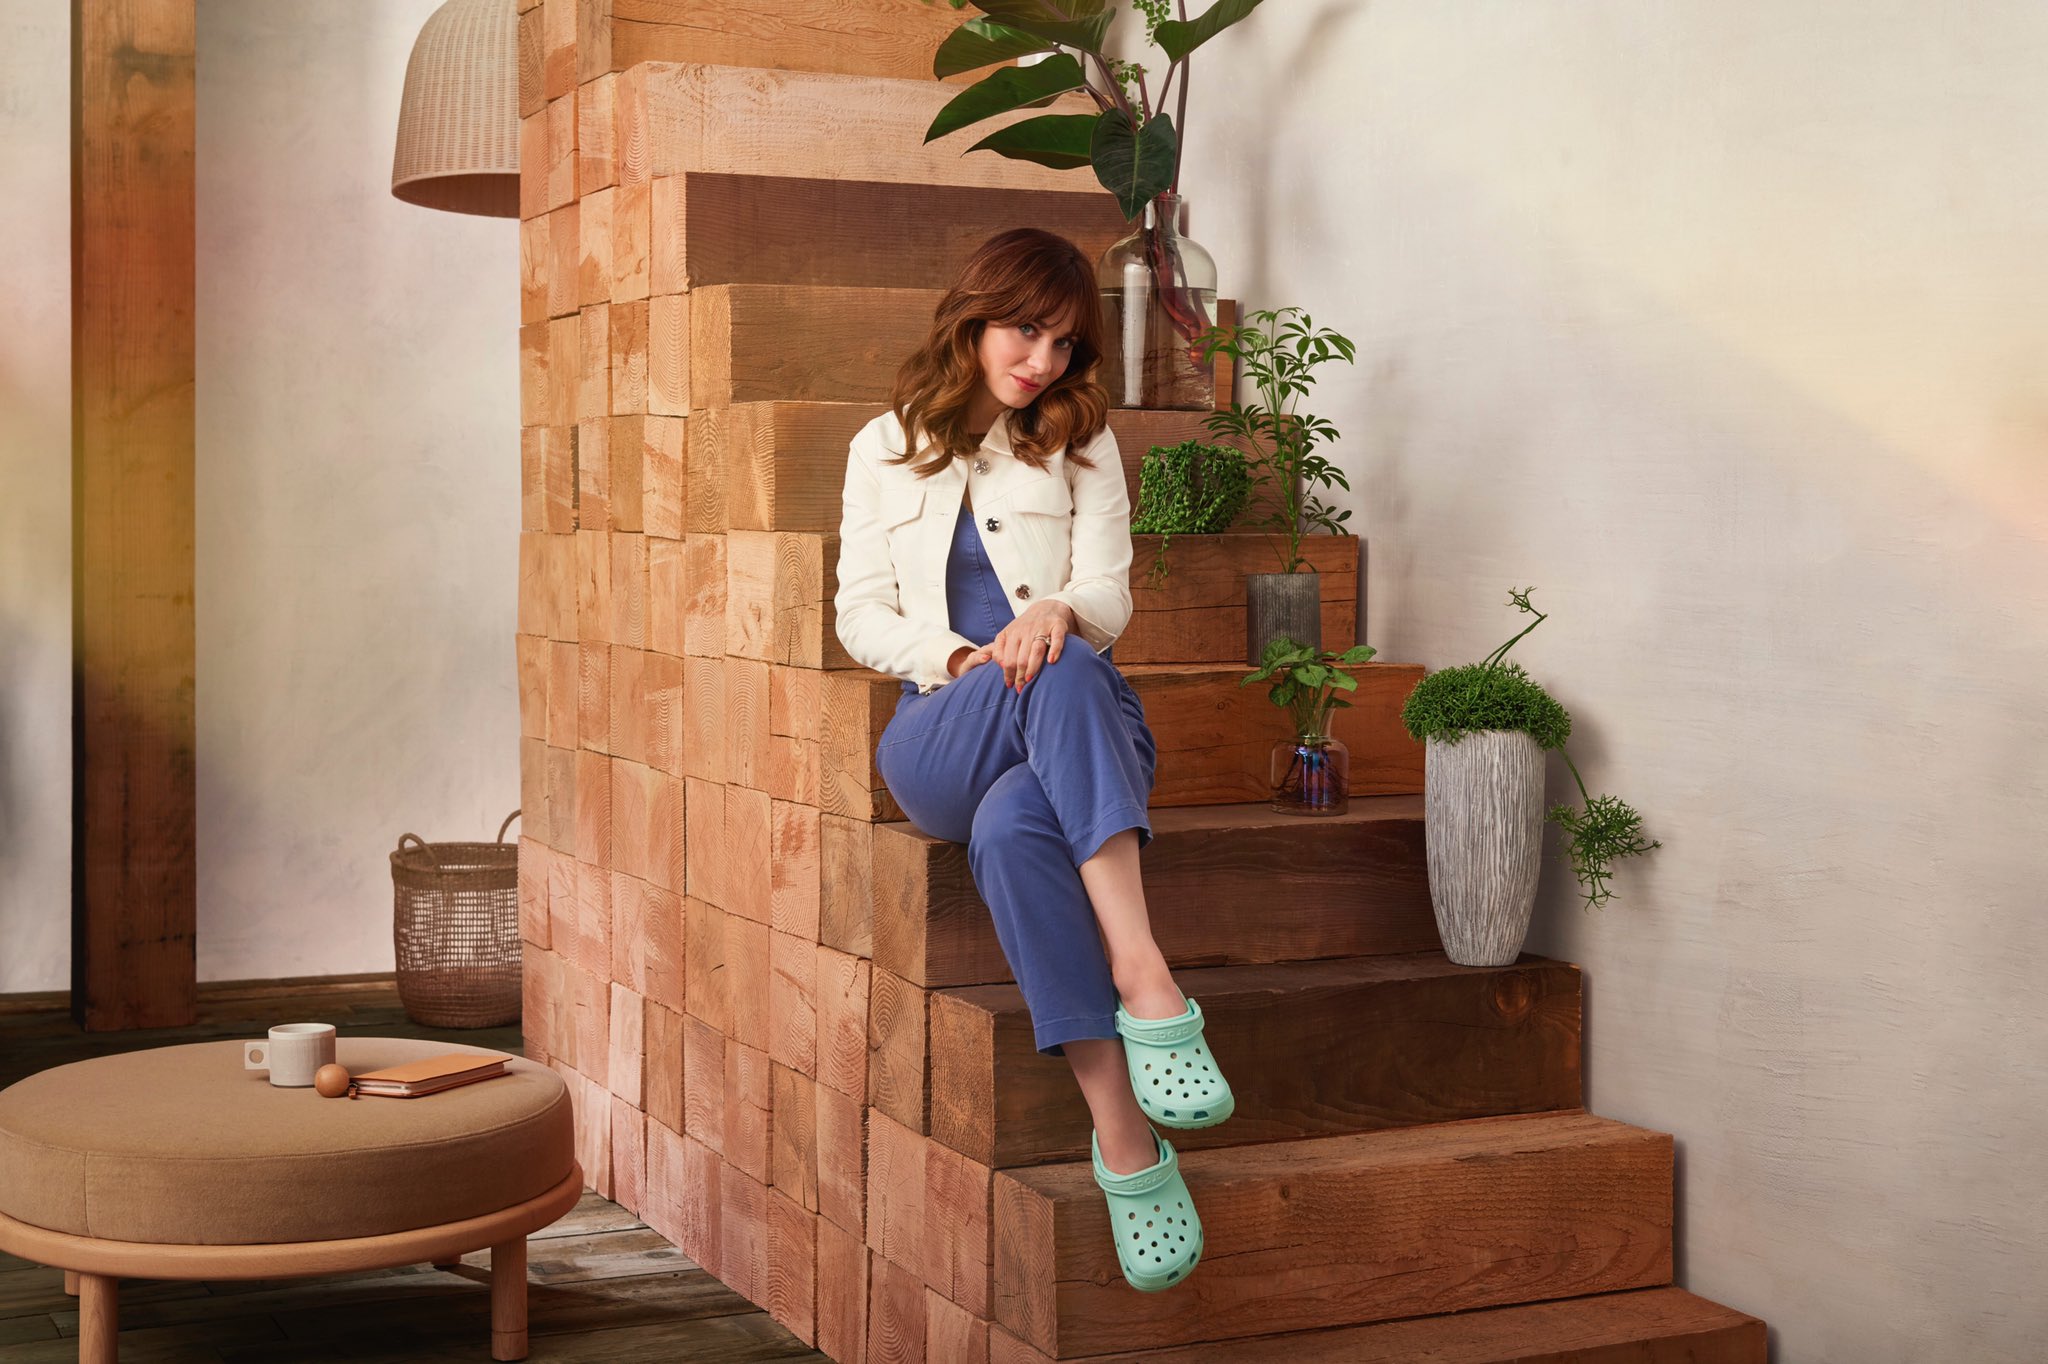 Twitter 上的zooey deschanel："Another year of celebrating #ComeAsYouAre with @ Crocs and I'm kicking things off in my new neo mint Classics! I partnering with company as they strive to make